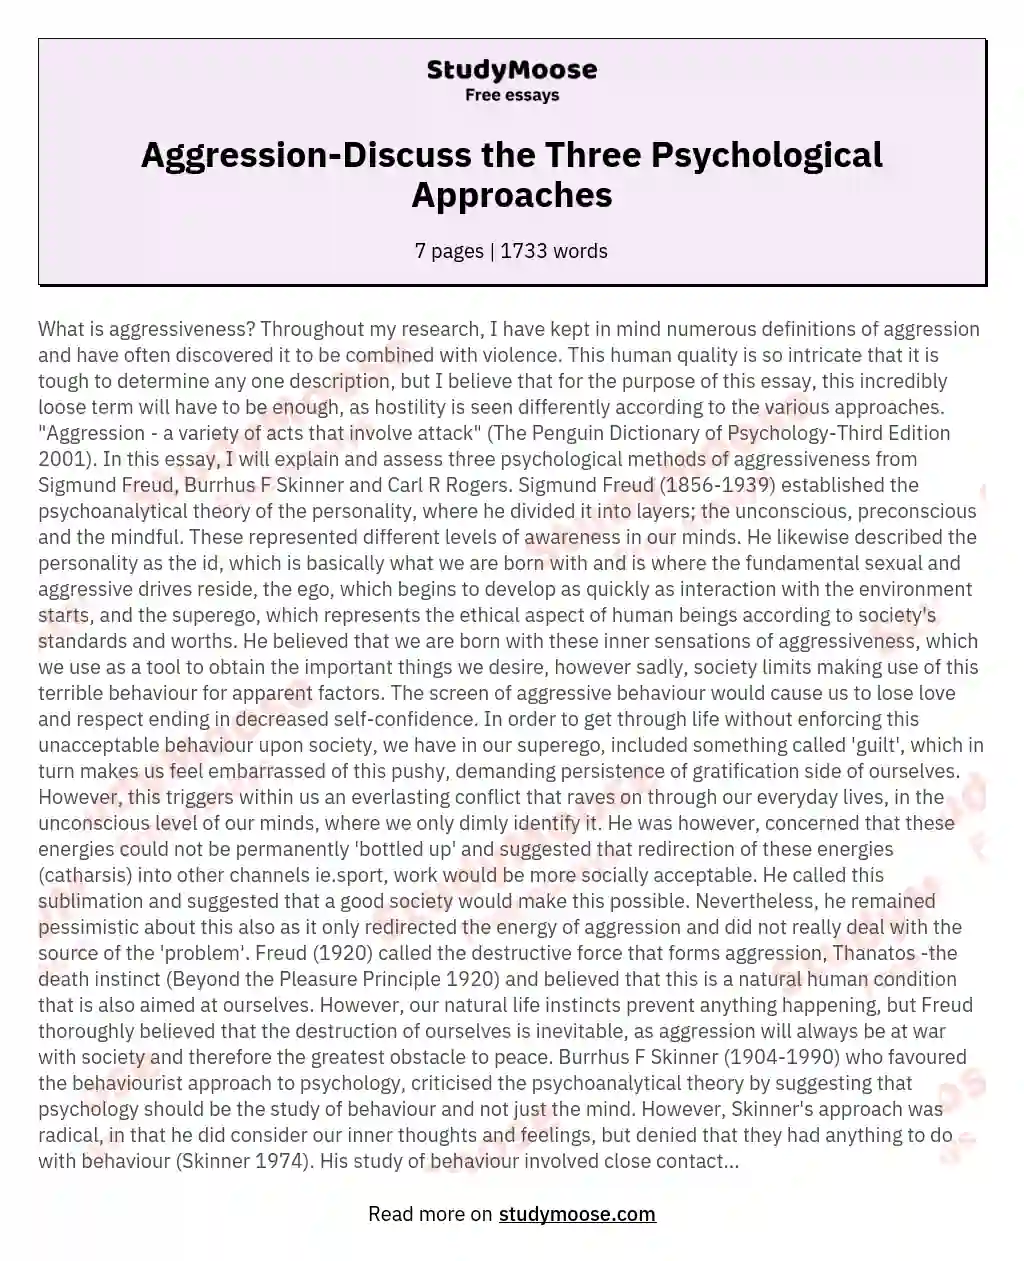 Aggression-Discuss the Three Psychological Approaches